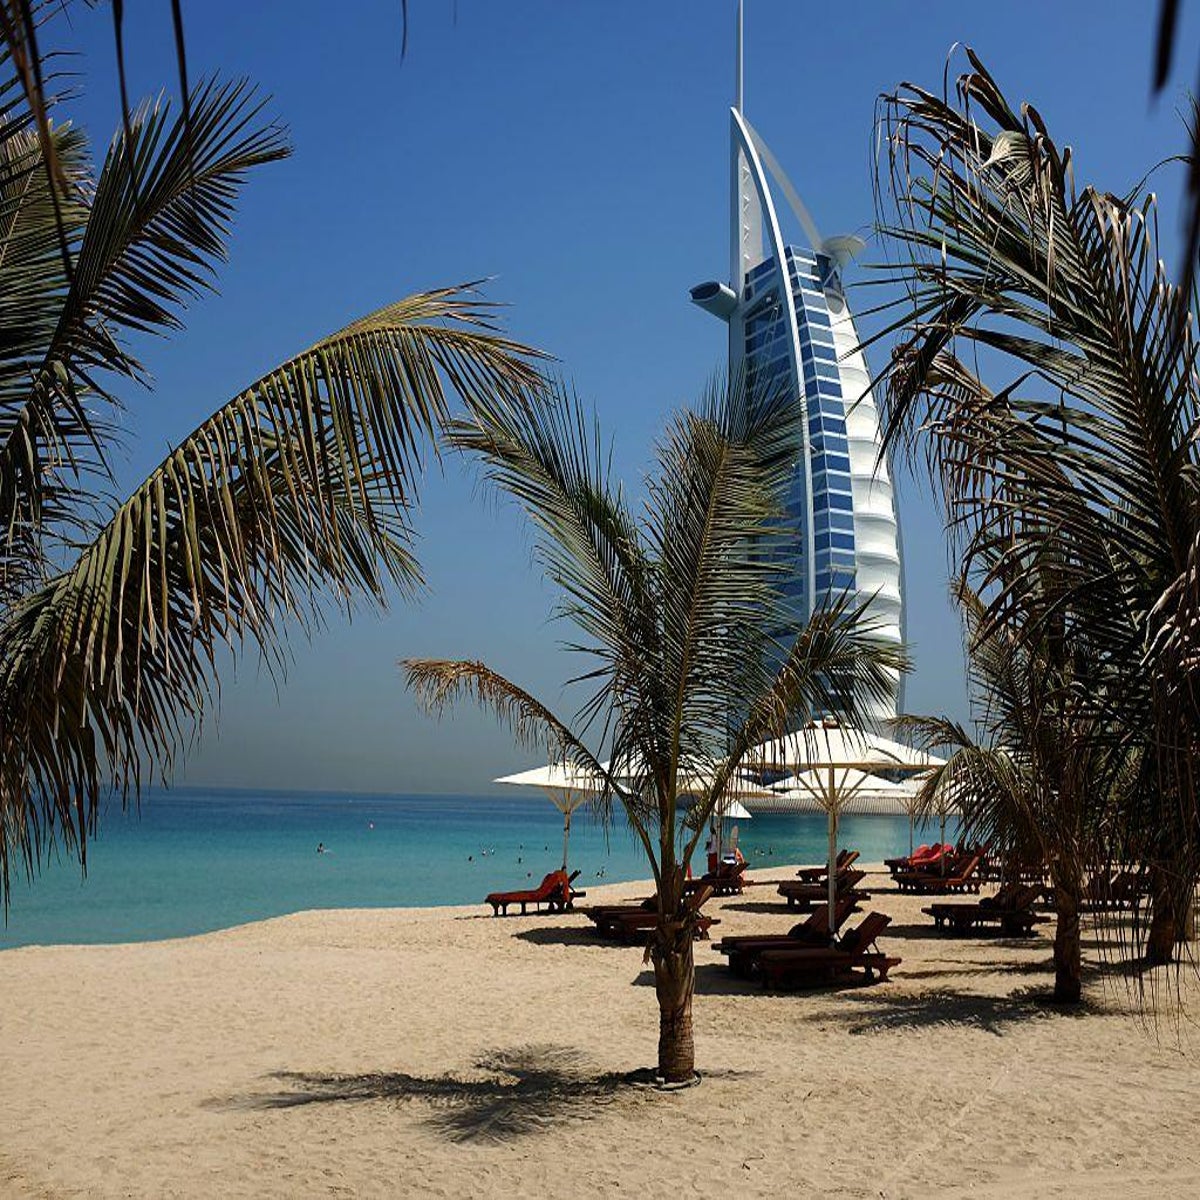 Girls Get Naked On The Beach - What not to do in Dubai as a tourist | The Independent | The Independent